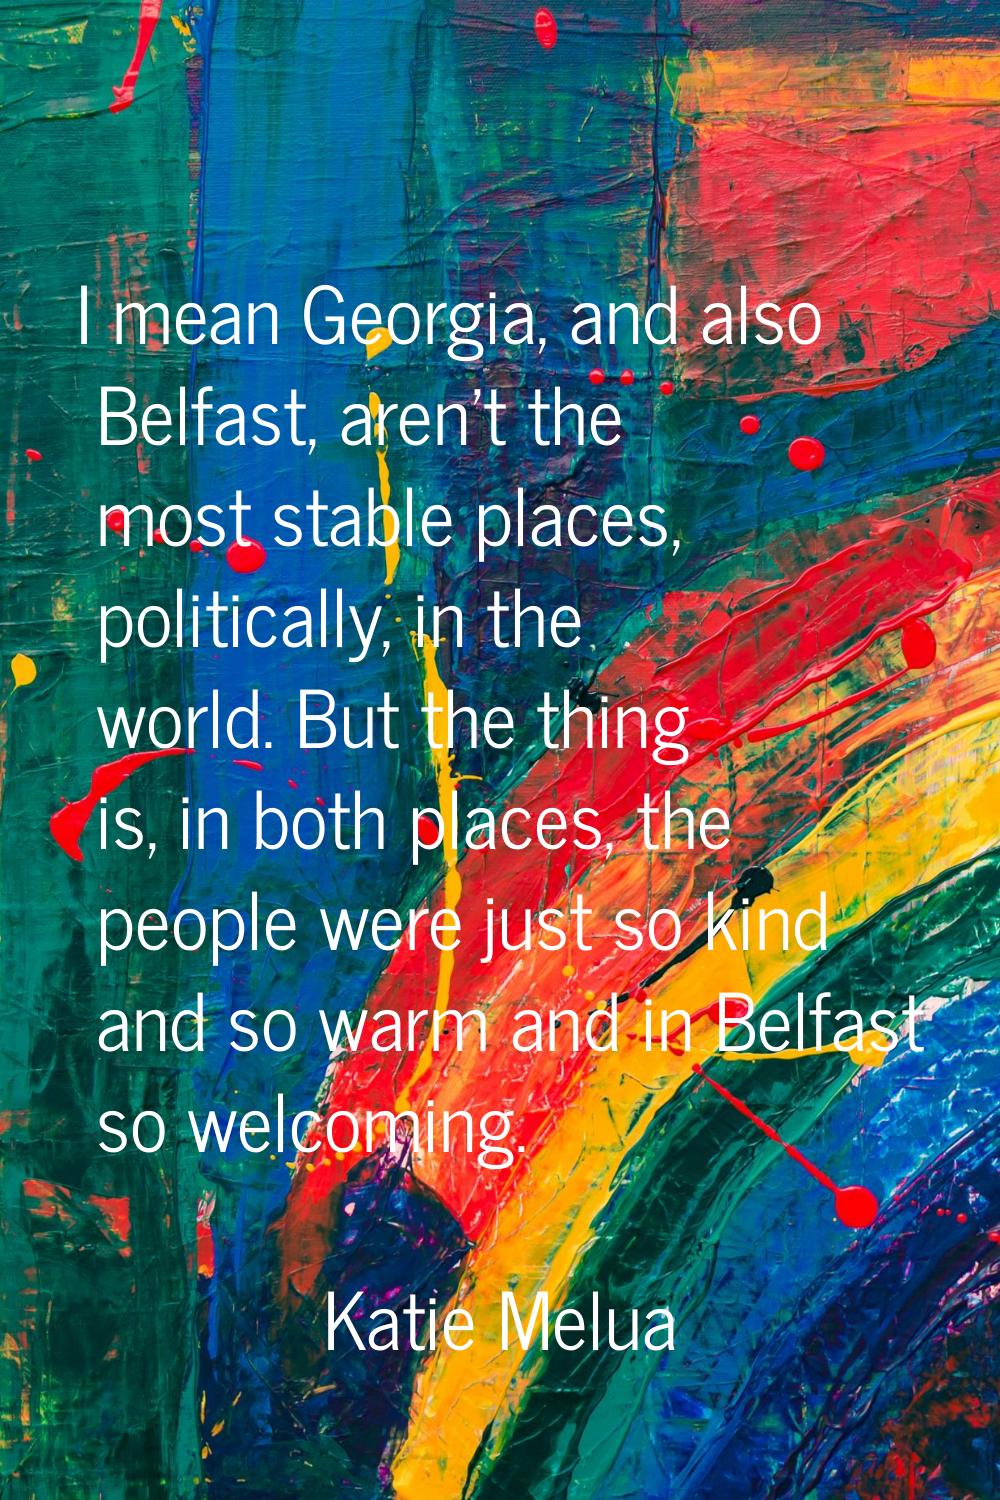 I mean Georgia, and also Belfast, aren't the most stable places, politically, in the world. But the